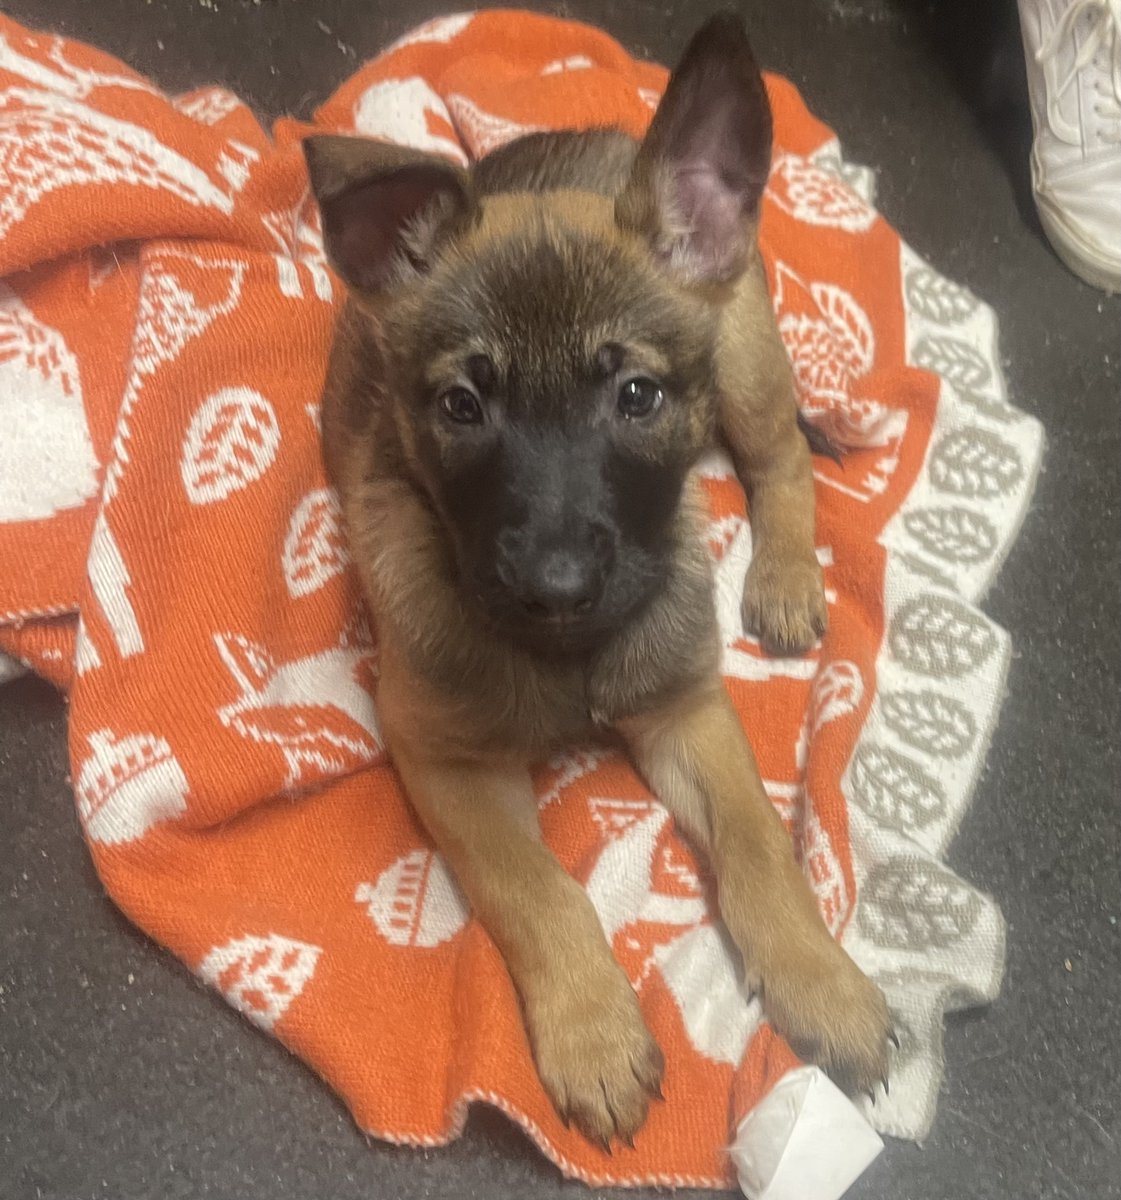 Please retweet to help this 9-10 week old puppy find a home #SHEFFIELD #YORKSHIRE #U
Found as a stray, being a #Malinois, she needs a very experienced, adult home to go on with all basic training, including housetraining. 
DETAILS or APPLY👇 ineedahome.co.uk/dogs/13357-fem…… #dogs